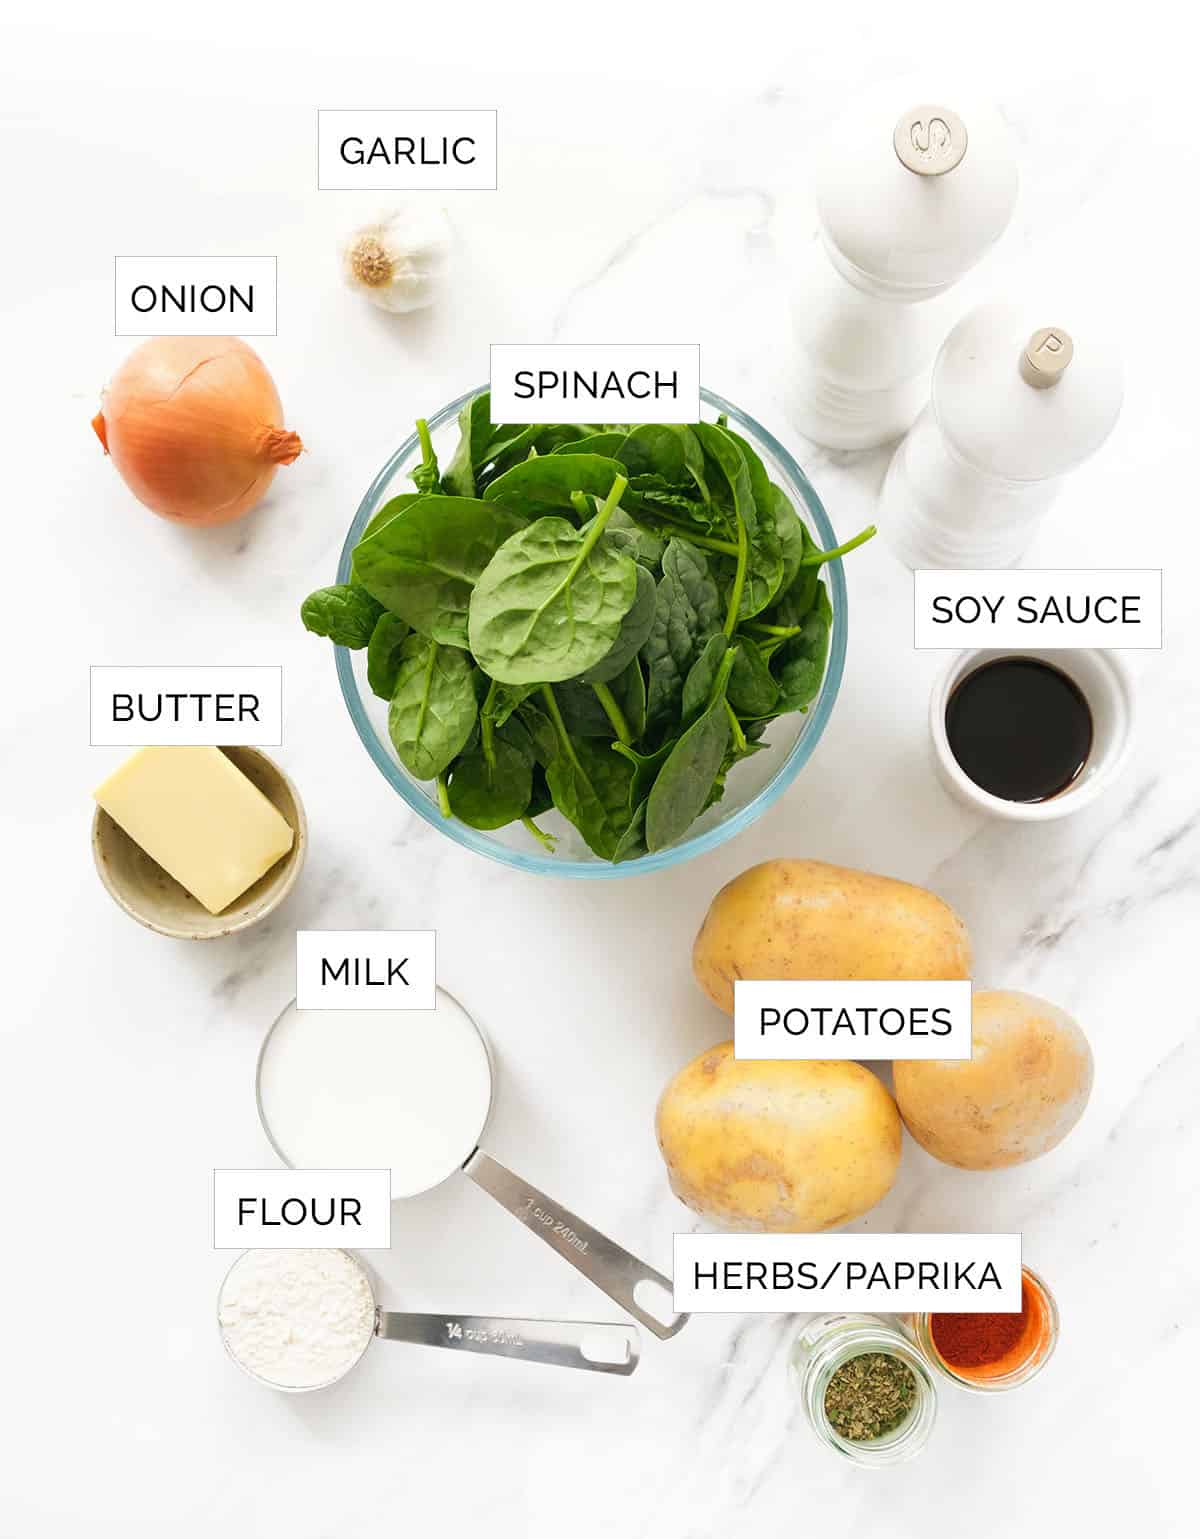 The ingredients to make this potato spinach soup are arranged over a white background.